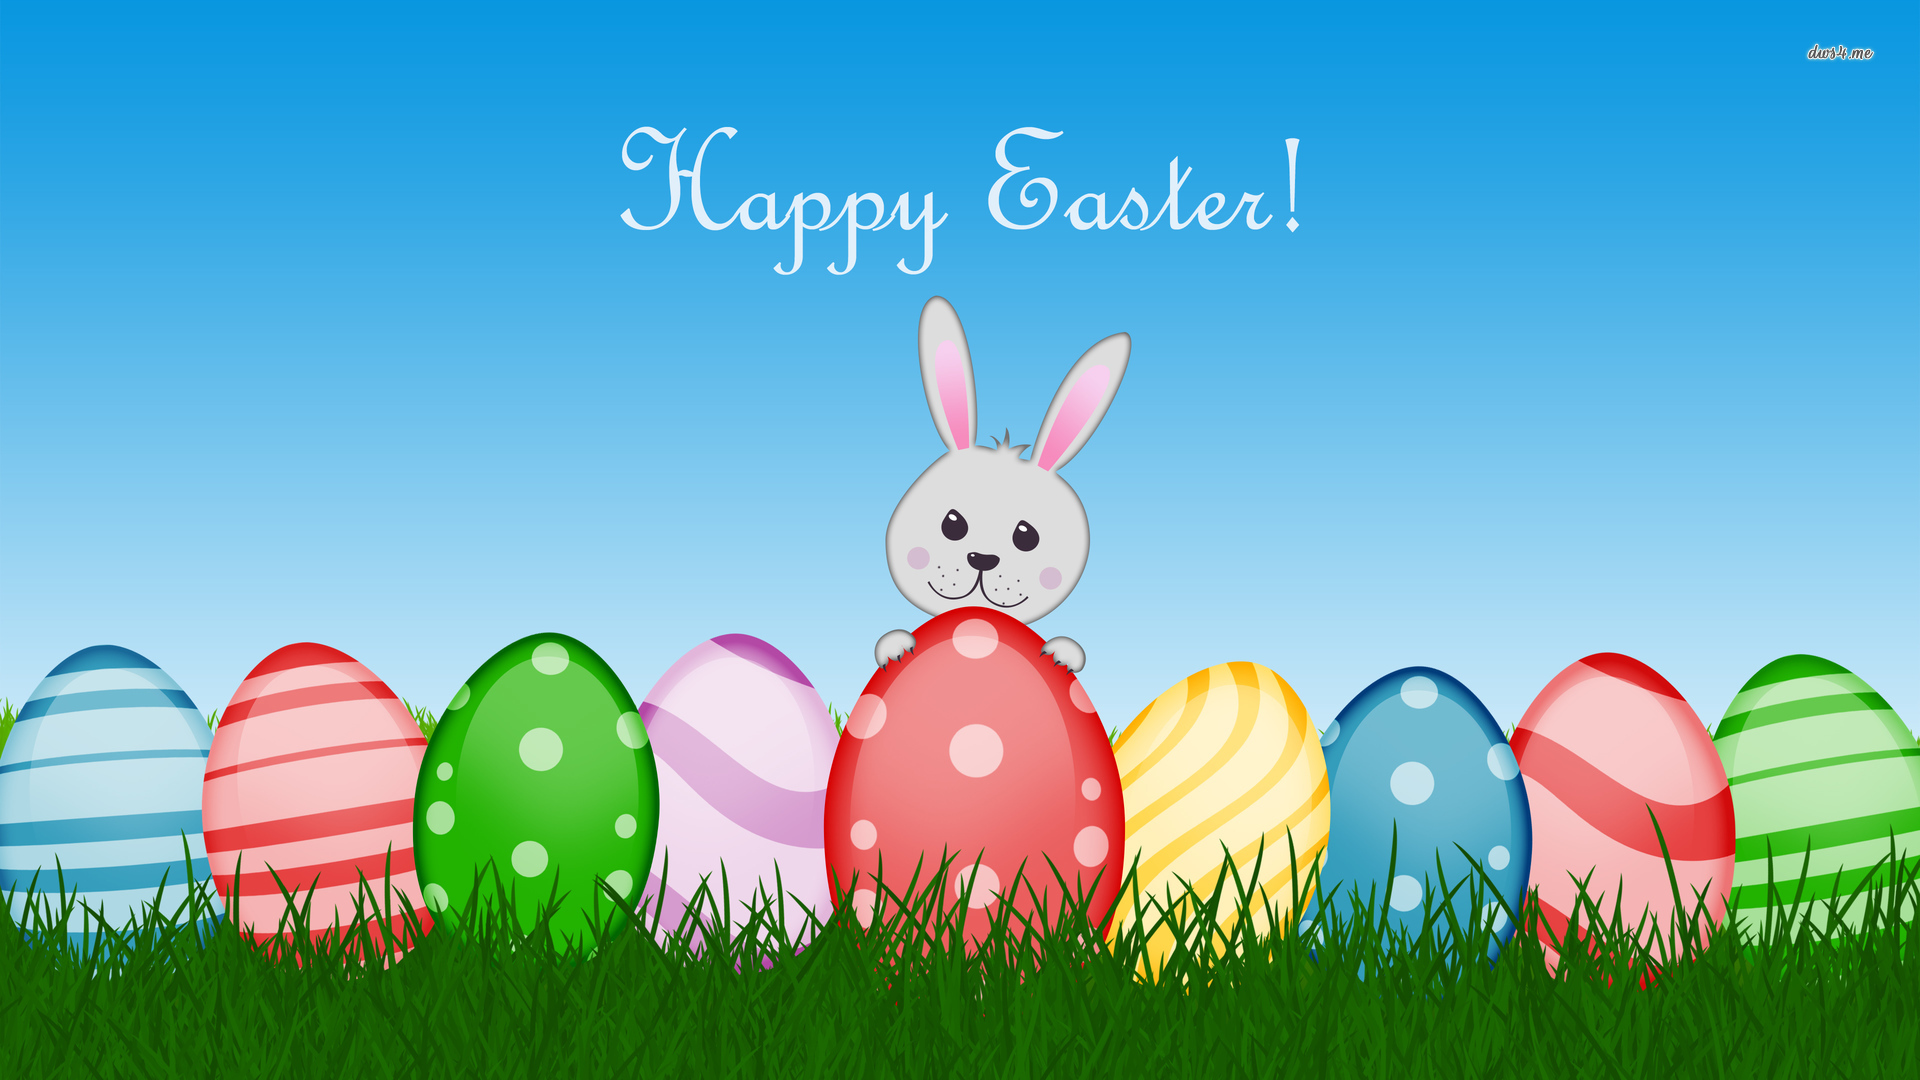 Easter bunny wallpaper   Holiday wallpapers   37550